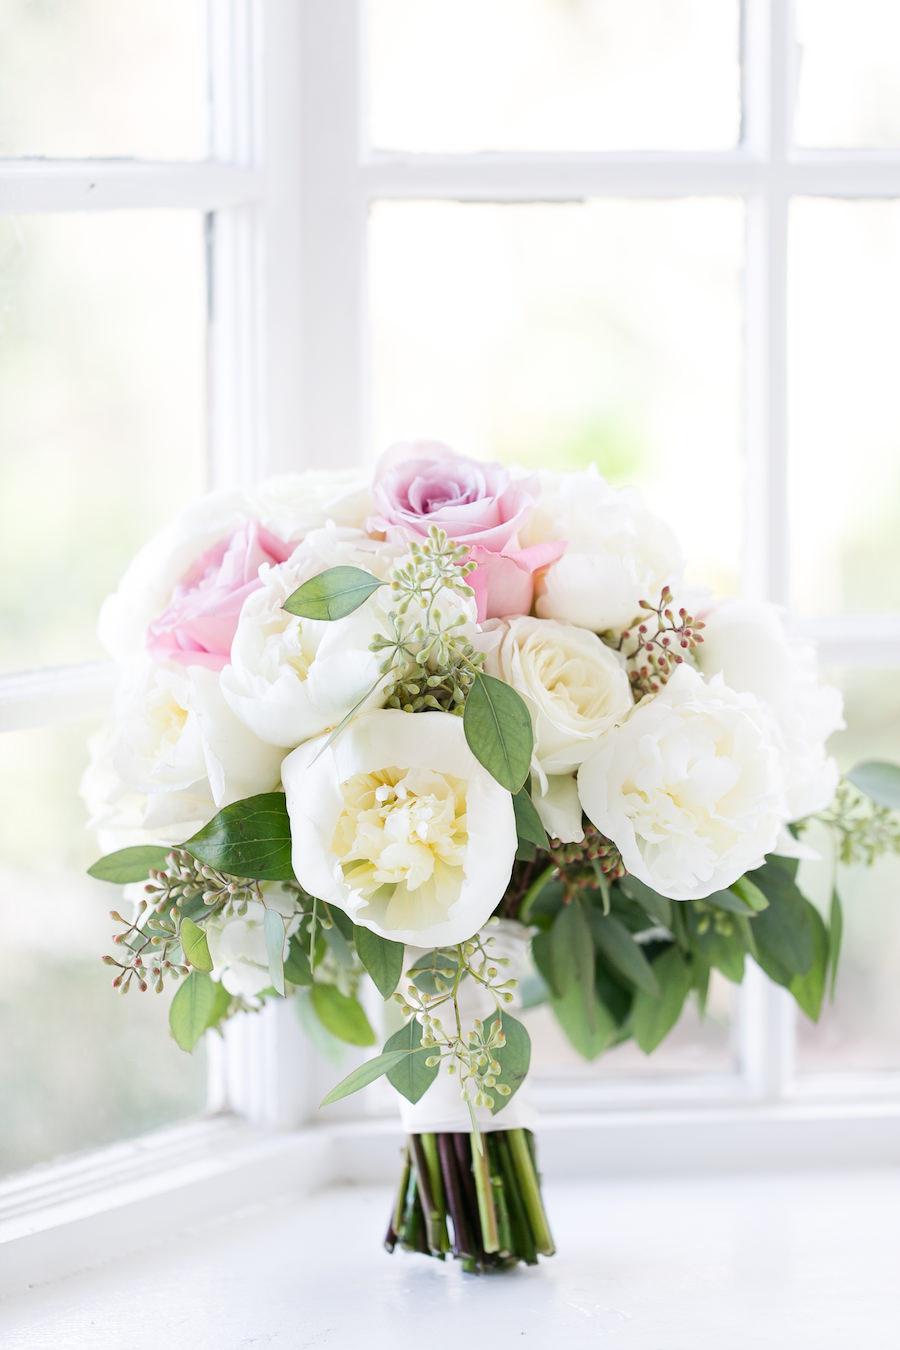 Ivory and Blush Bridal Bouquet with Ranunculus, Roses, Baby's Breath and Greenery